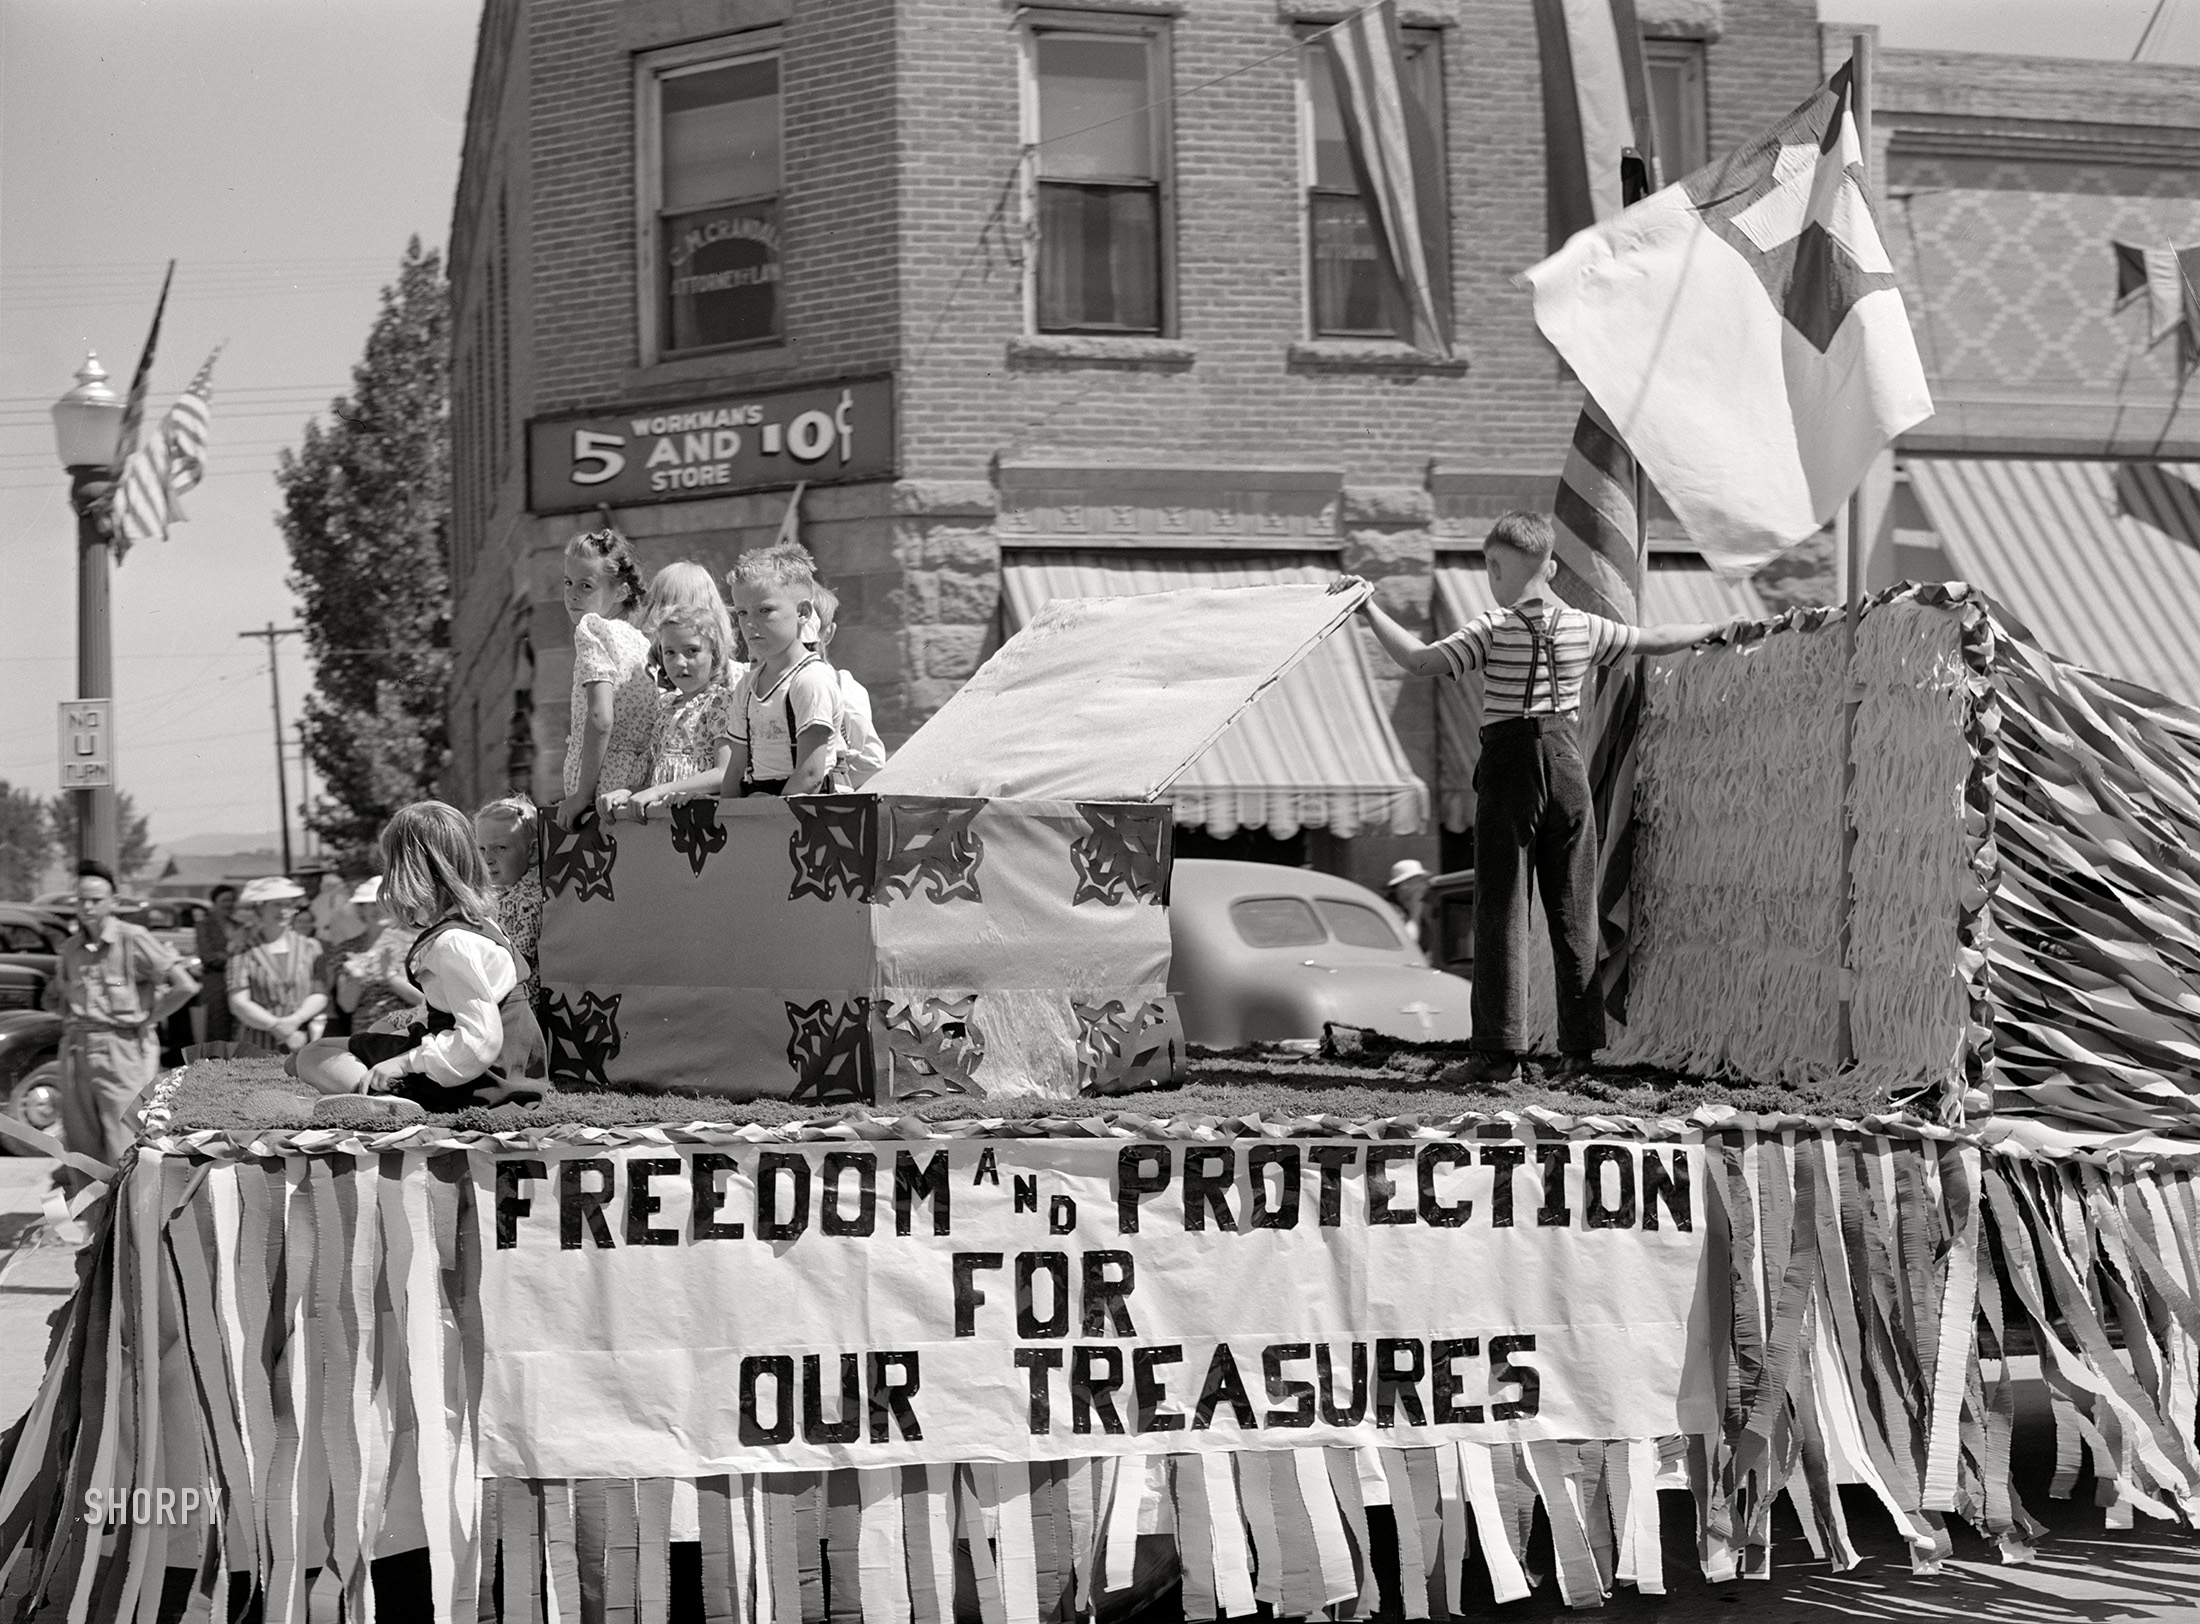 July 4, 1941. Vale, Oregon. "One of the floats in the Fourth of July parade." Medium format acetate negative by Russell Lee for the Farm Security Administration. View full size.